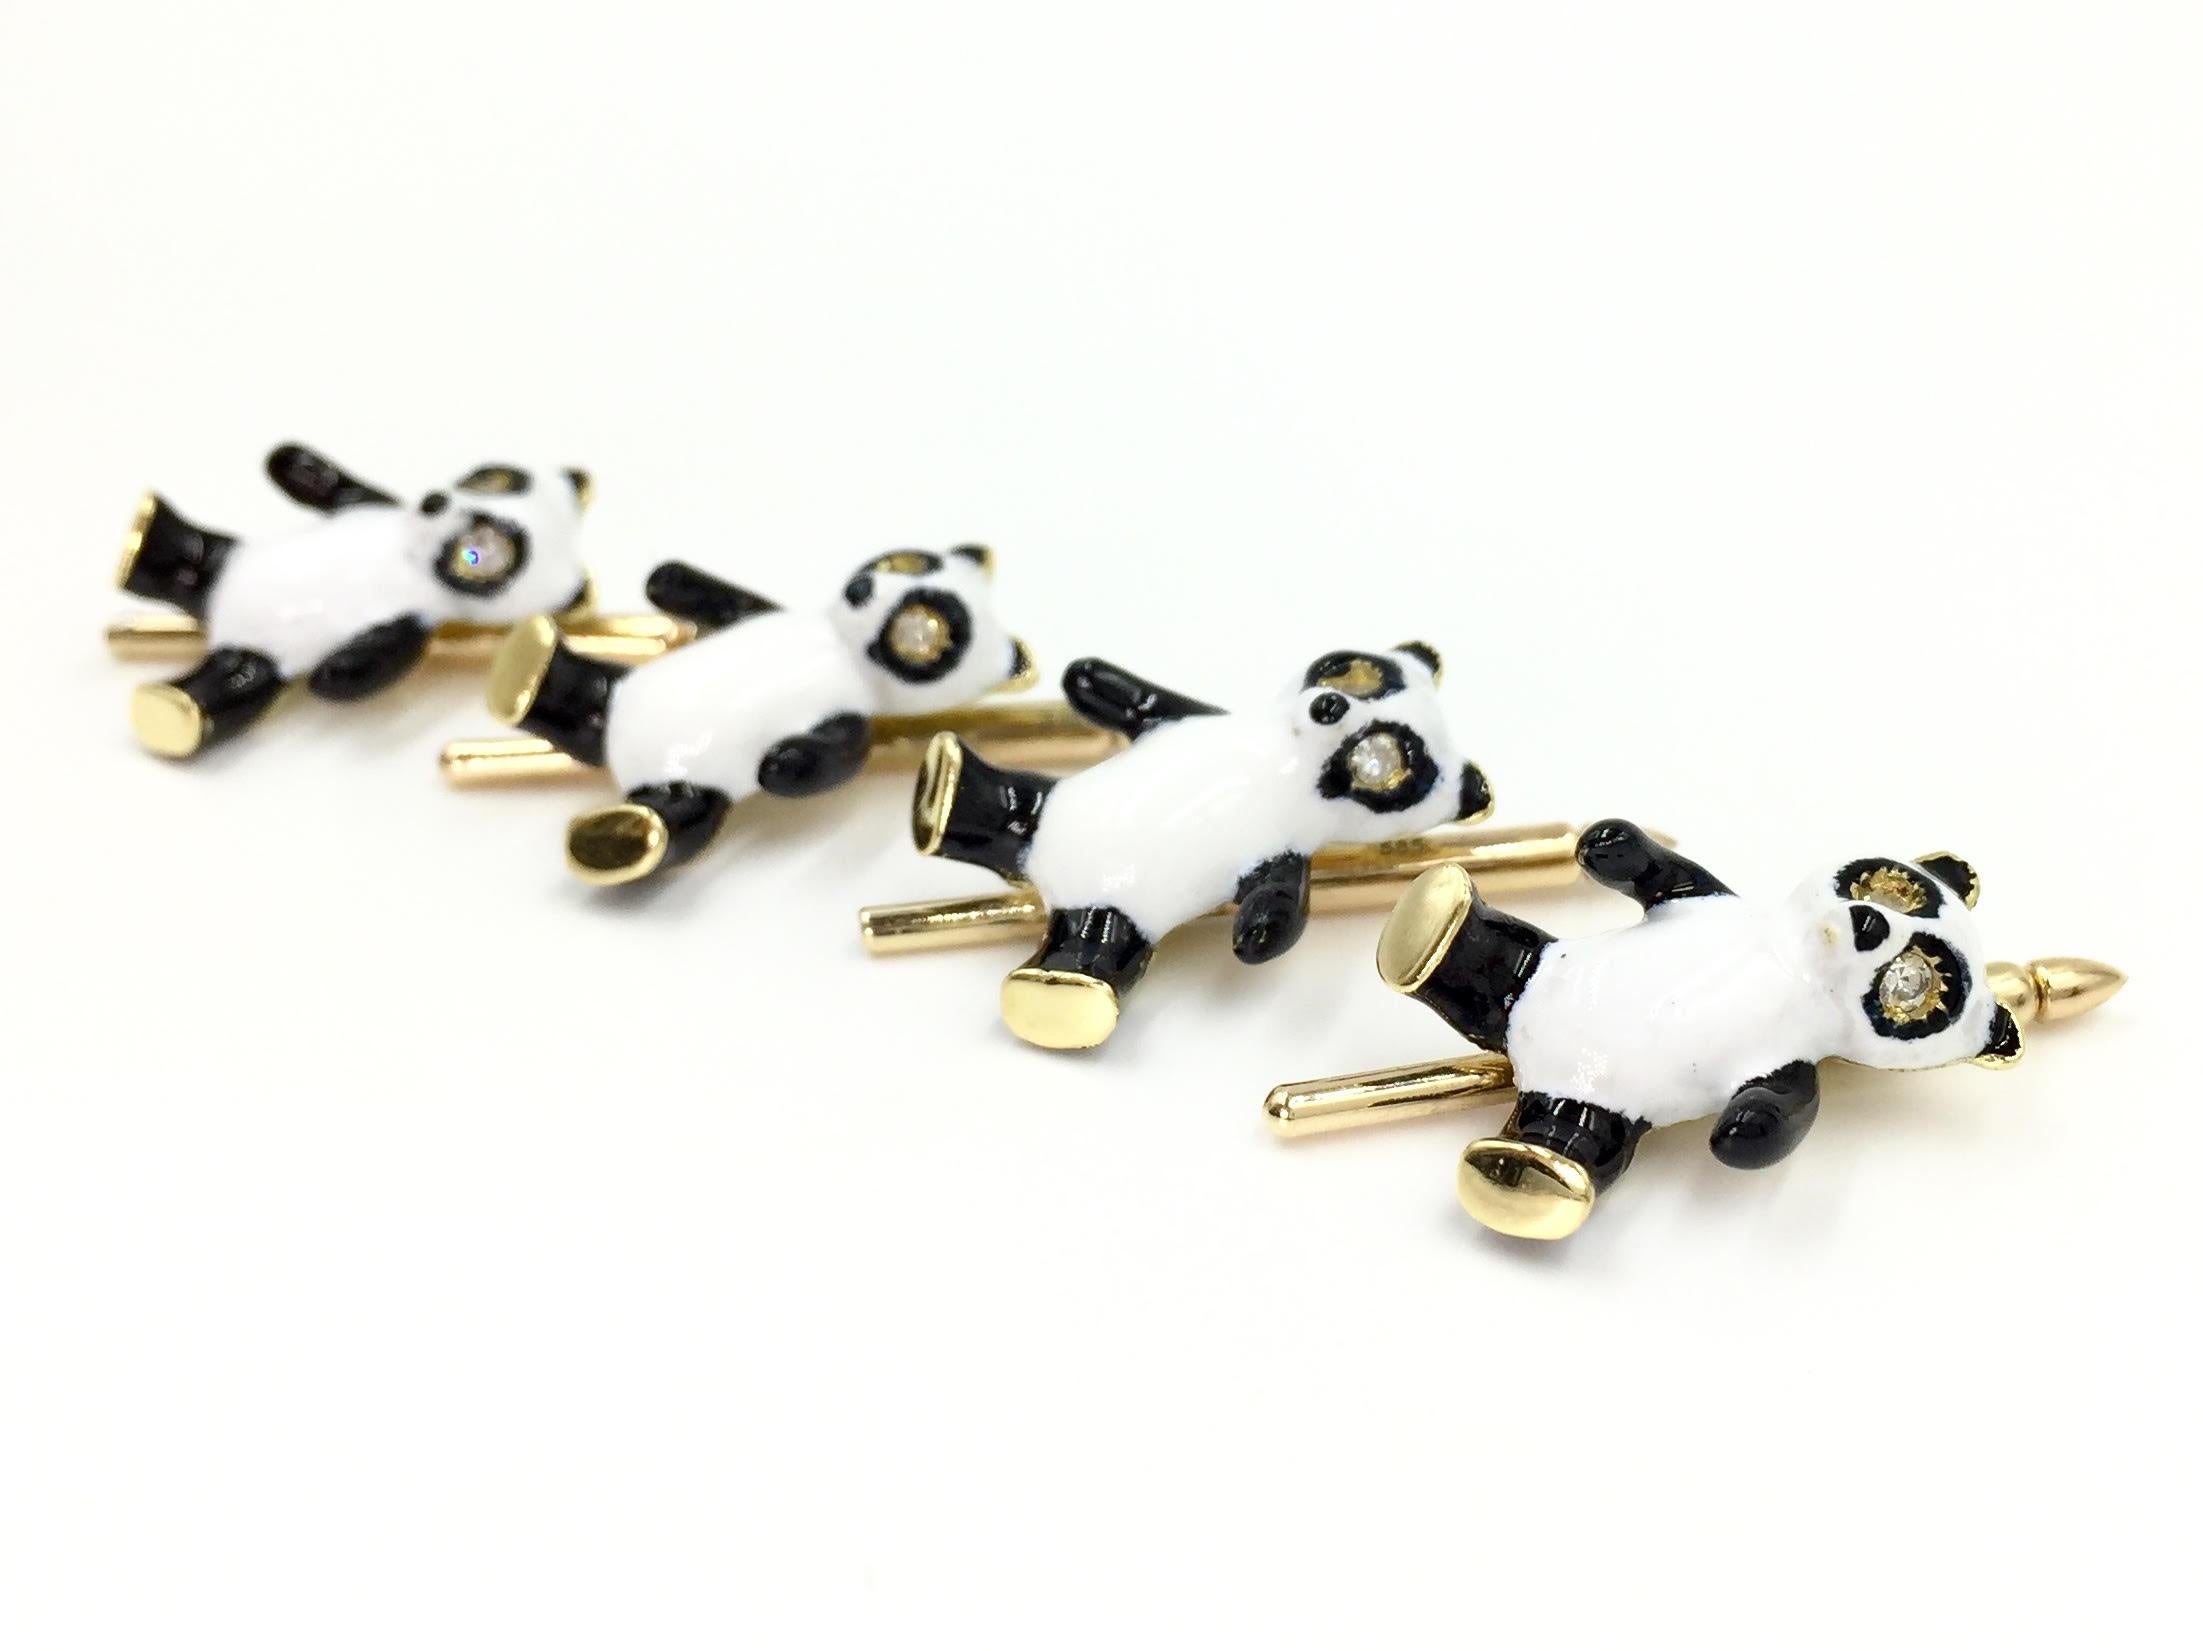 Circa 1978. A truly unique find for a vintage cuff link and shirt stud collector. These fun 18 karat yellow gold panda vintage shirt studs feature black and white hand painted enamel with round diamond eyes. Set of four.
Each panda has a length of